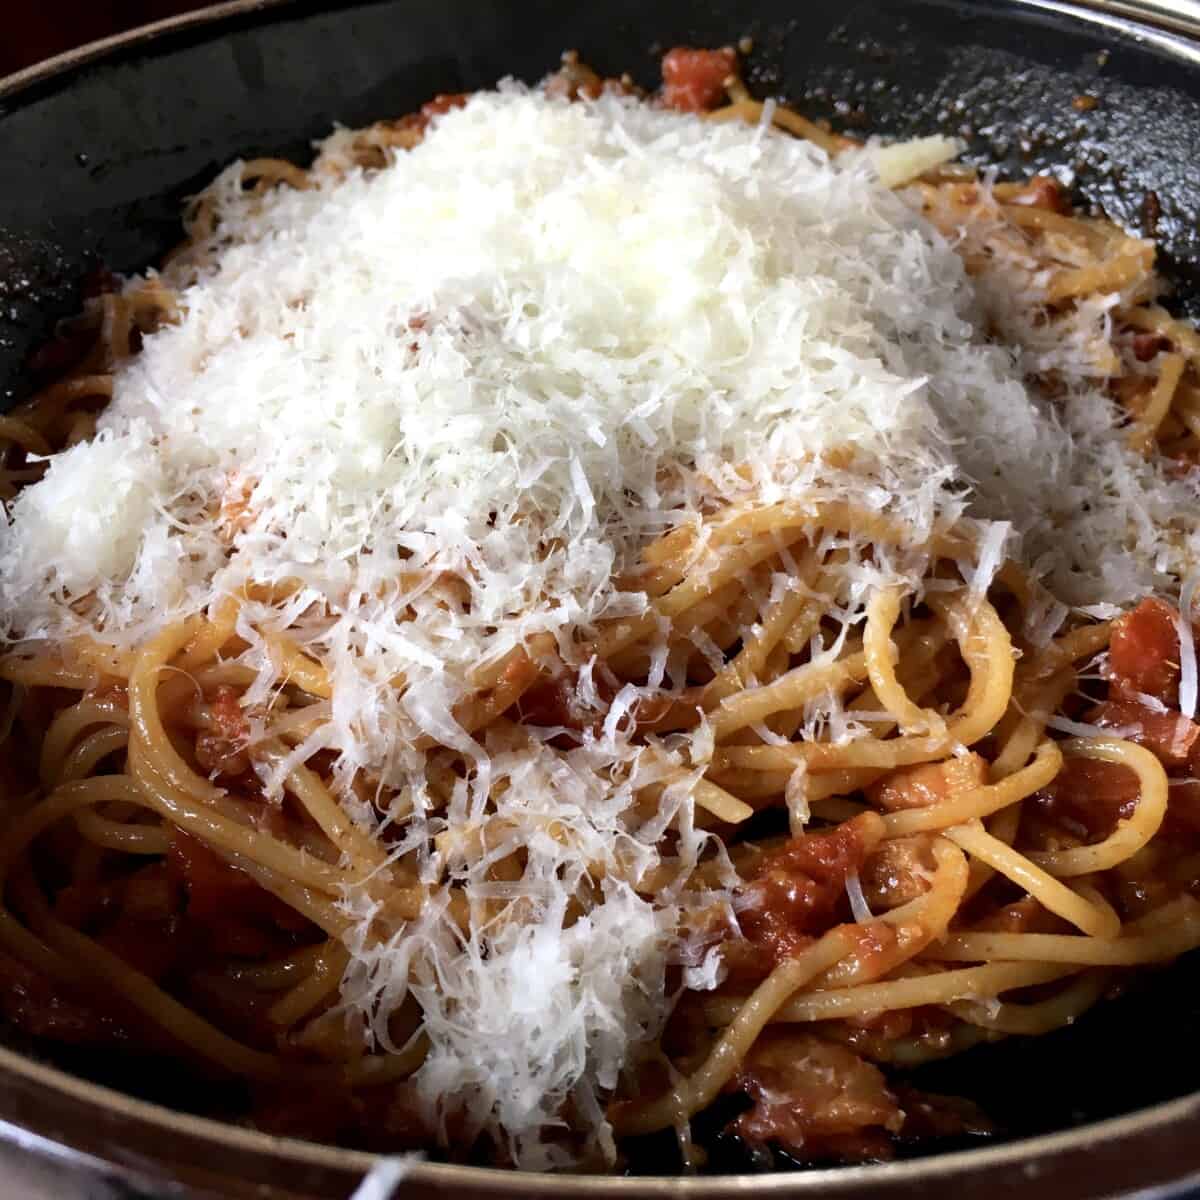 pasta all' amatriciana covered with a blanket of freshly grated pecorino cheese